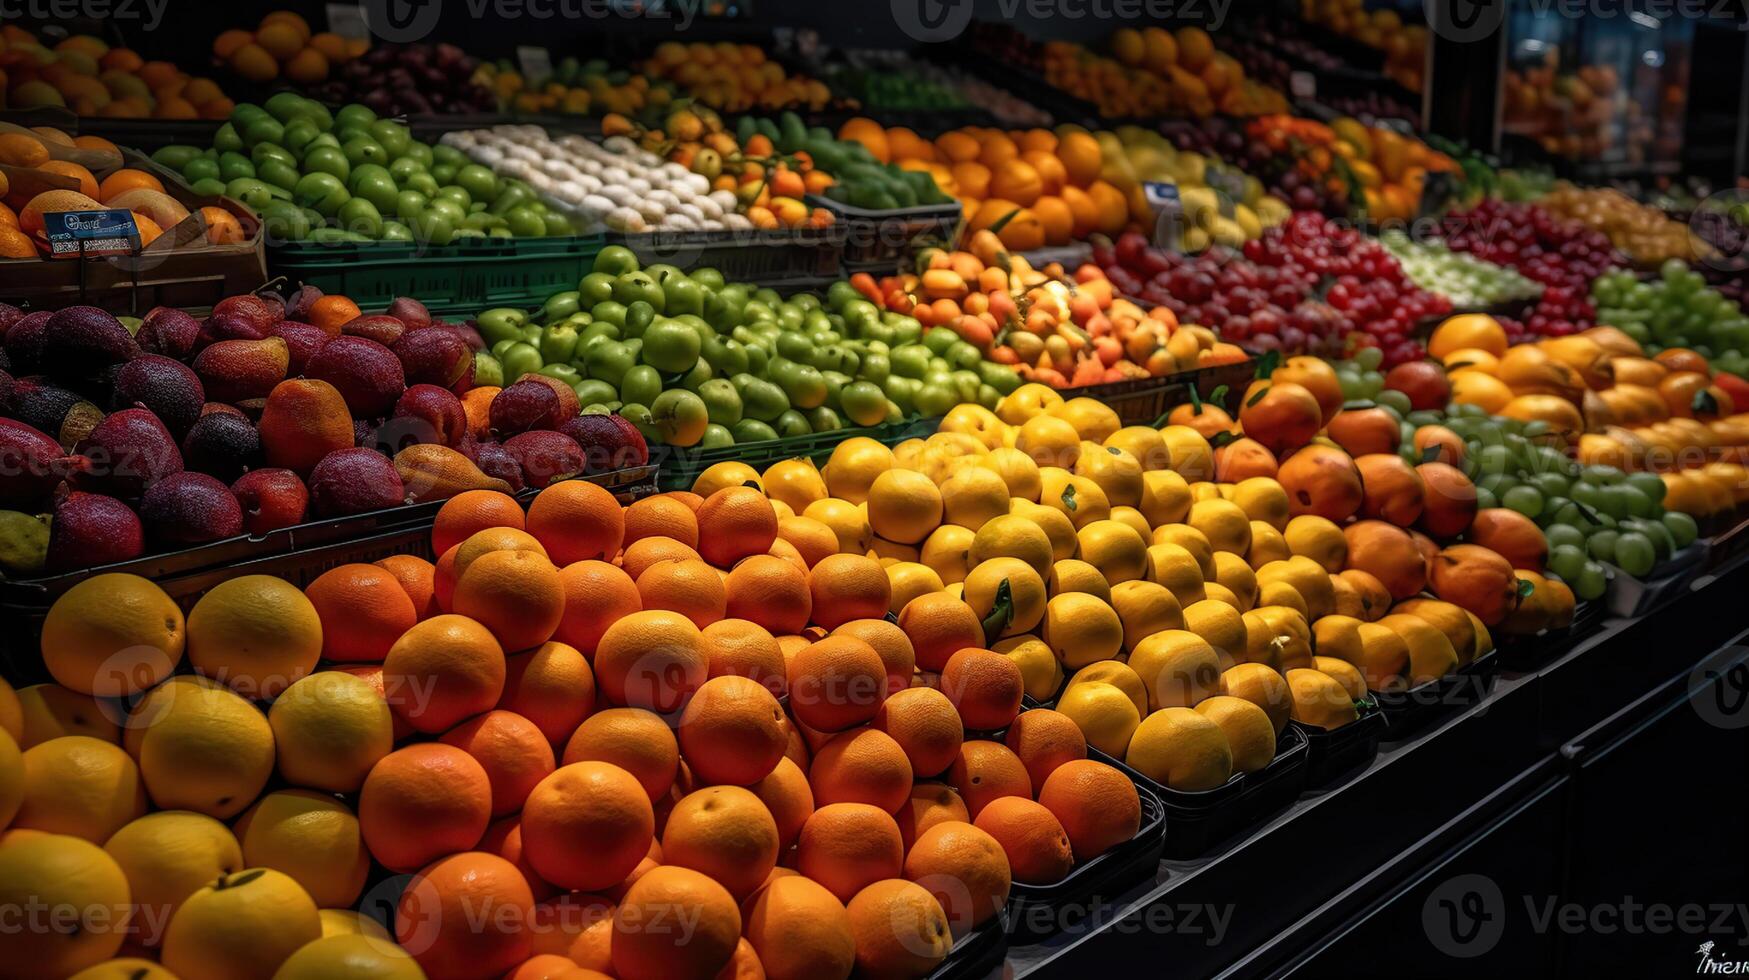 Fruits in supermarket, photo